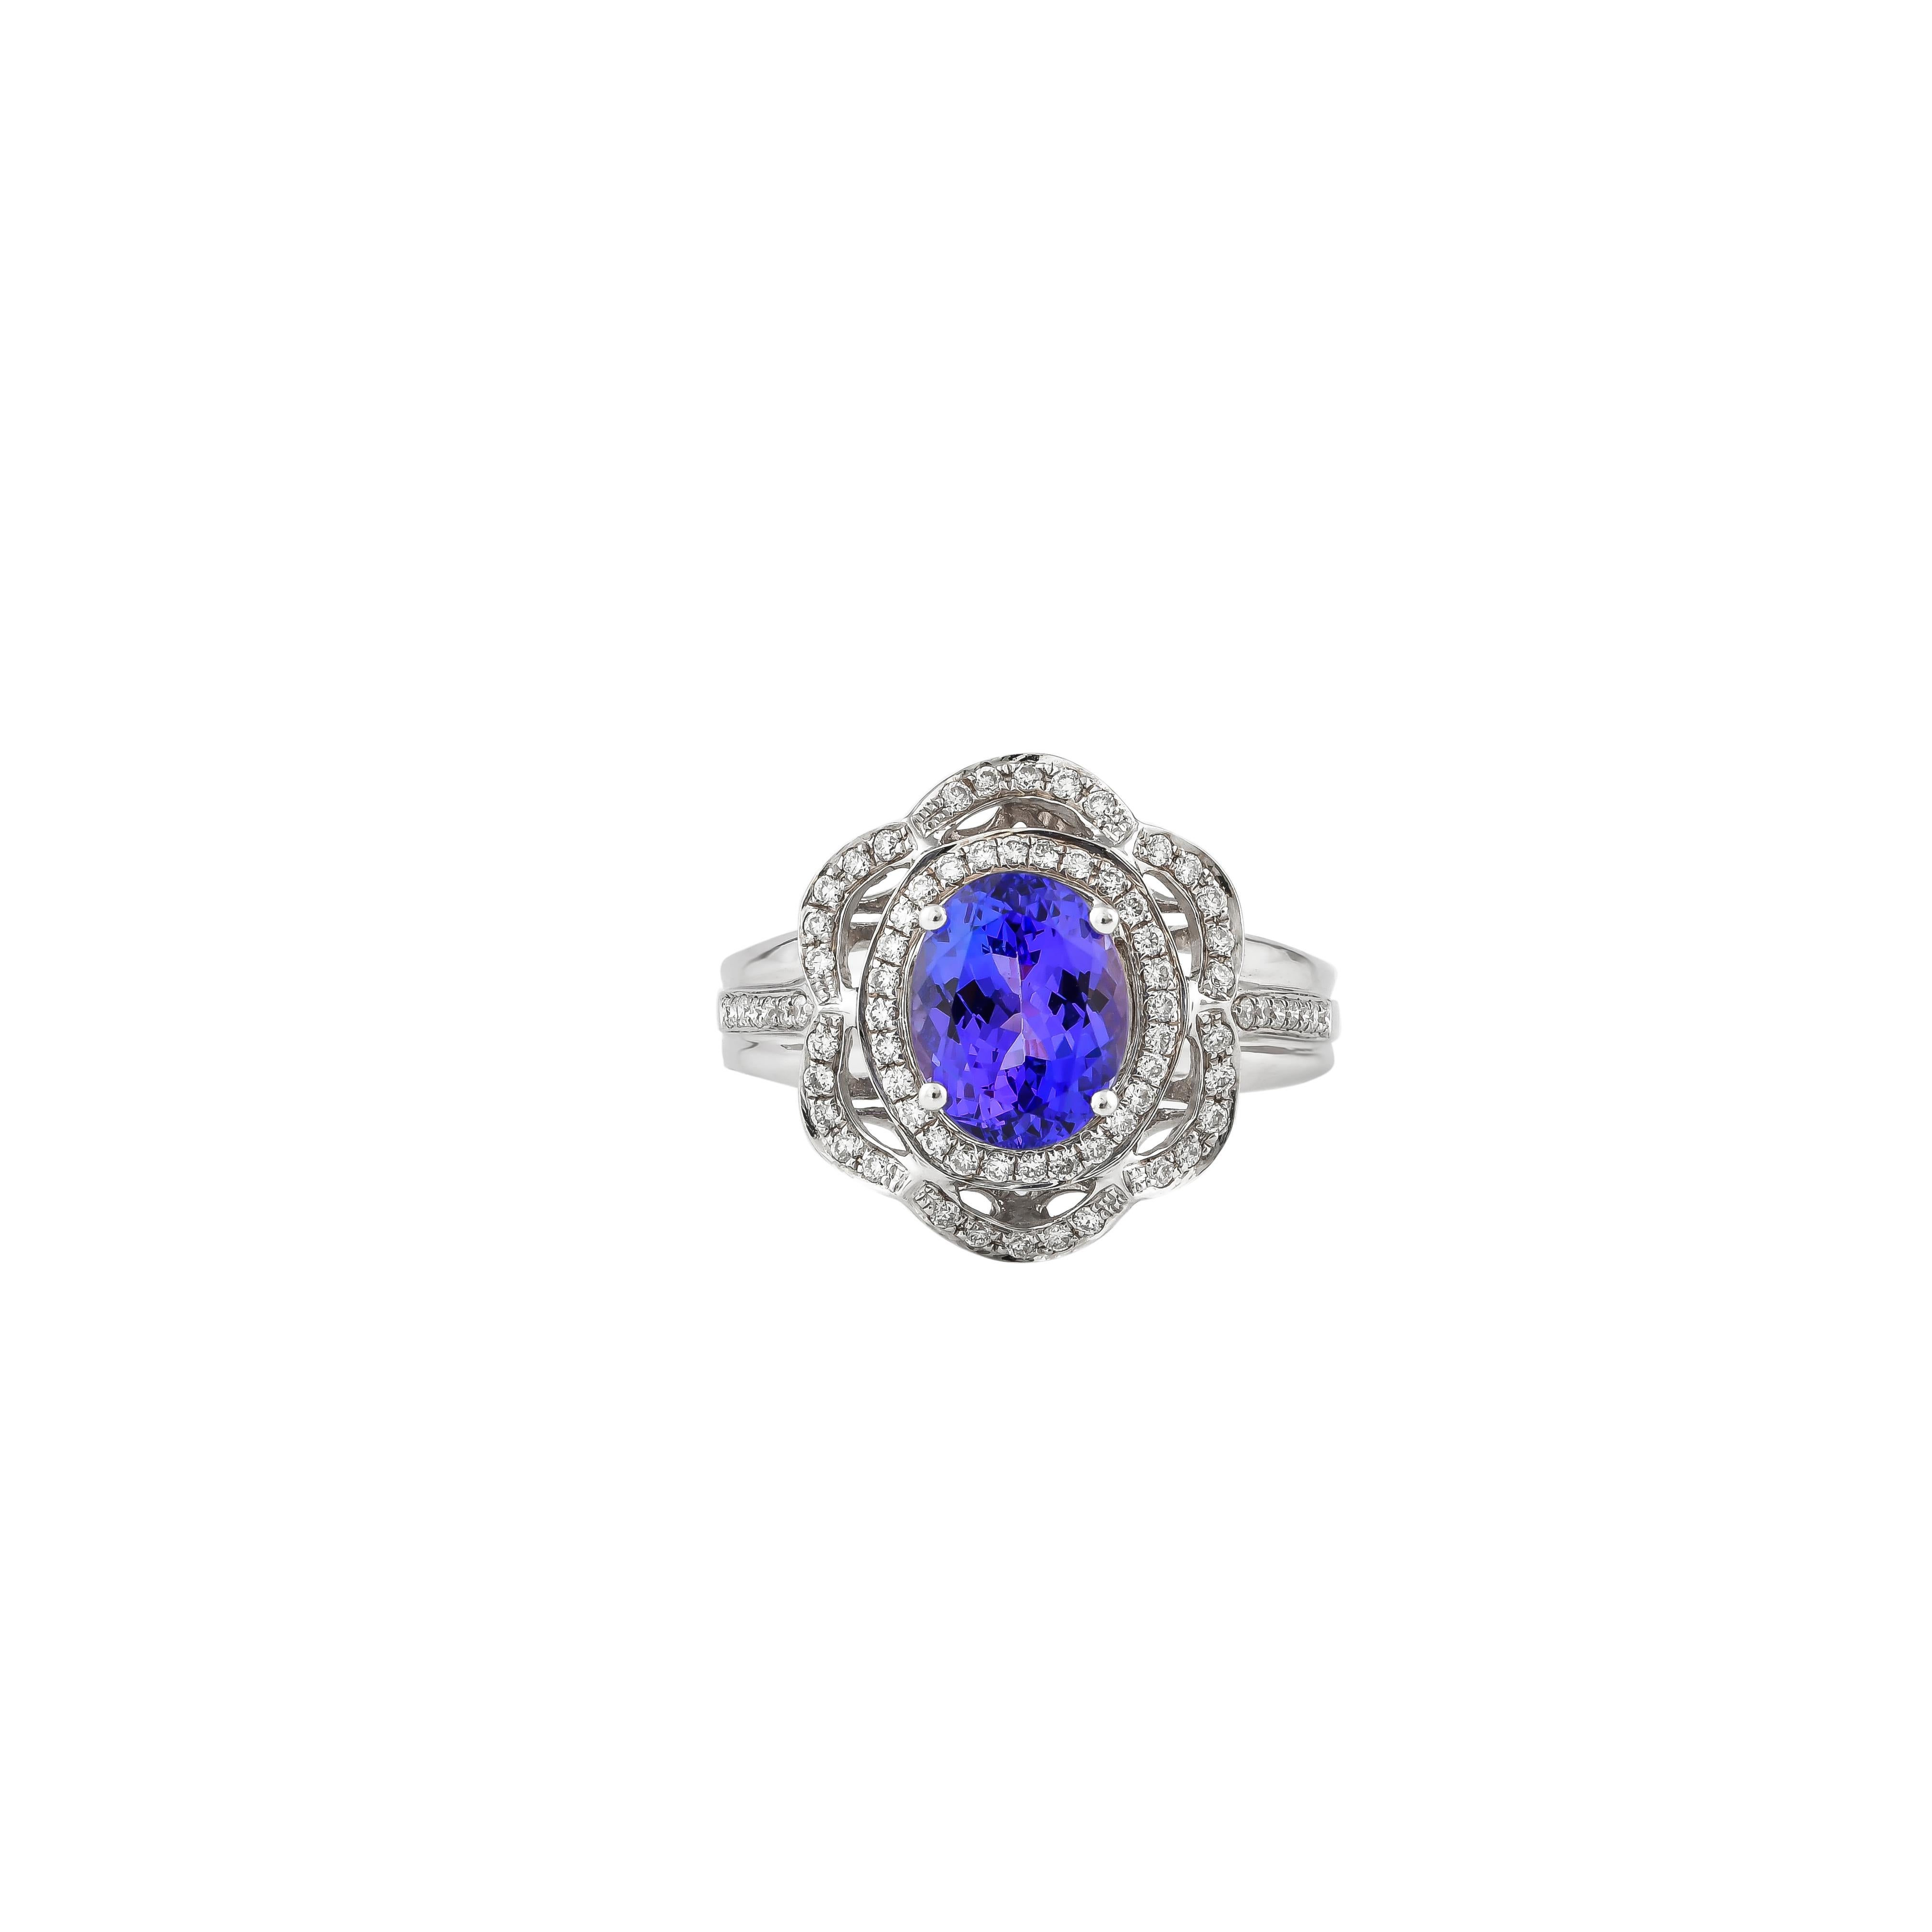 Oval Cut 2.34 Carat Tanzanite Ring in 18 Karat White Gold with Diamond. For Sale